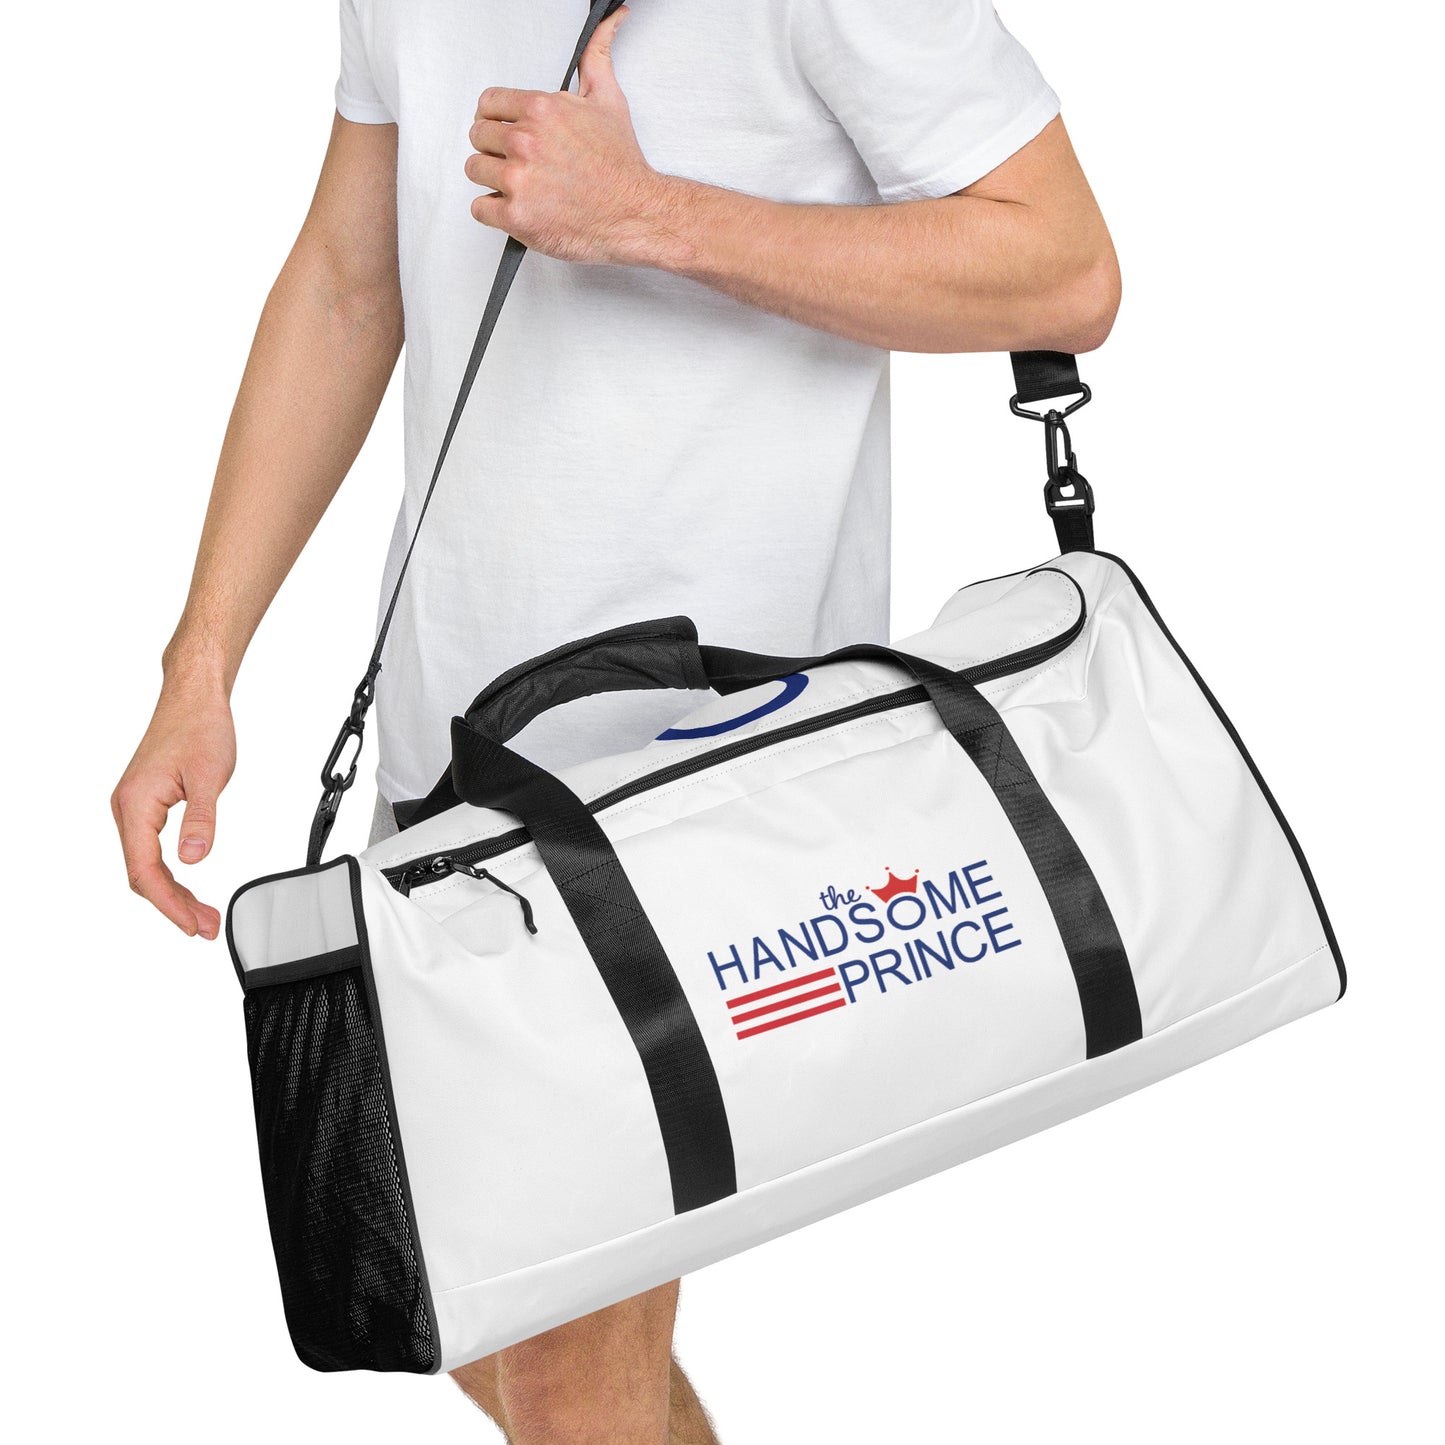 Classic Handsome Prince Duffle Bag